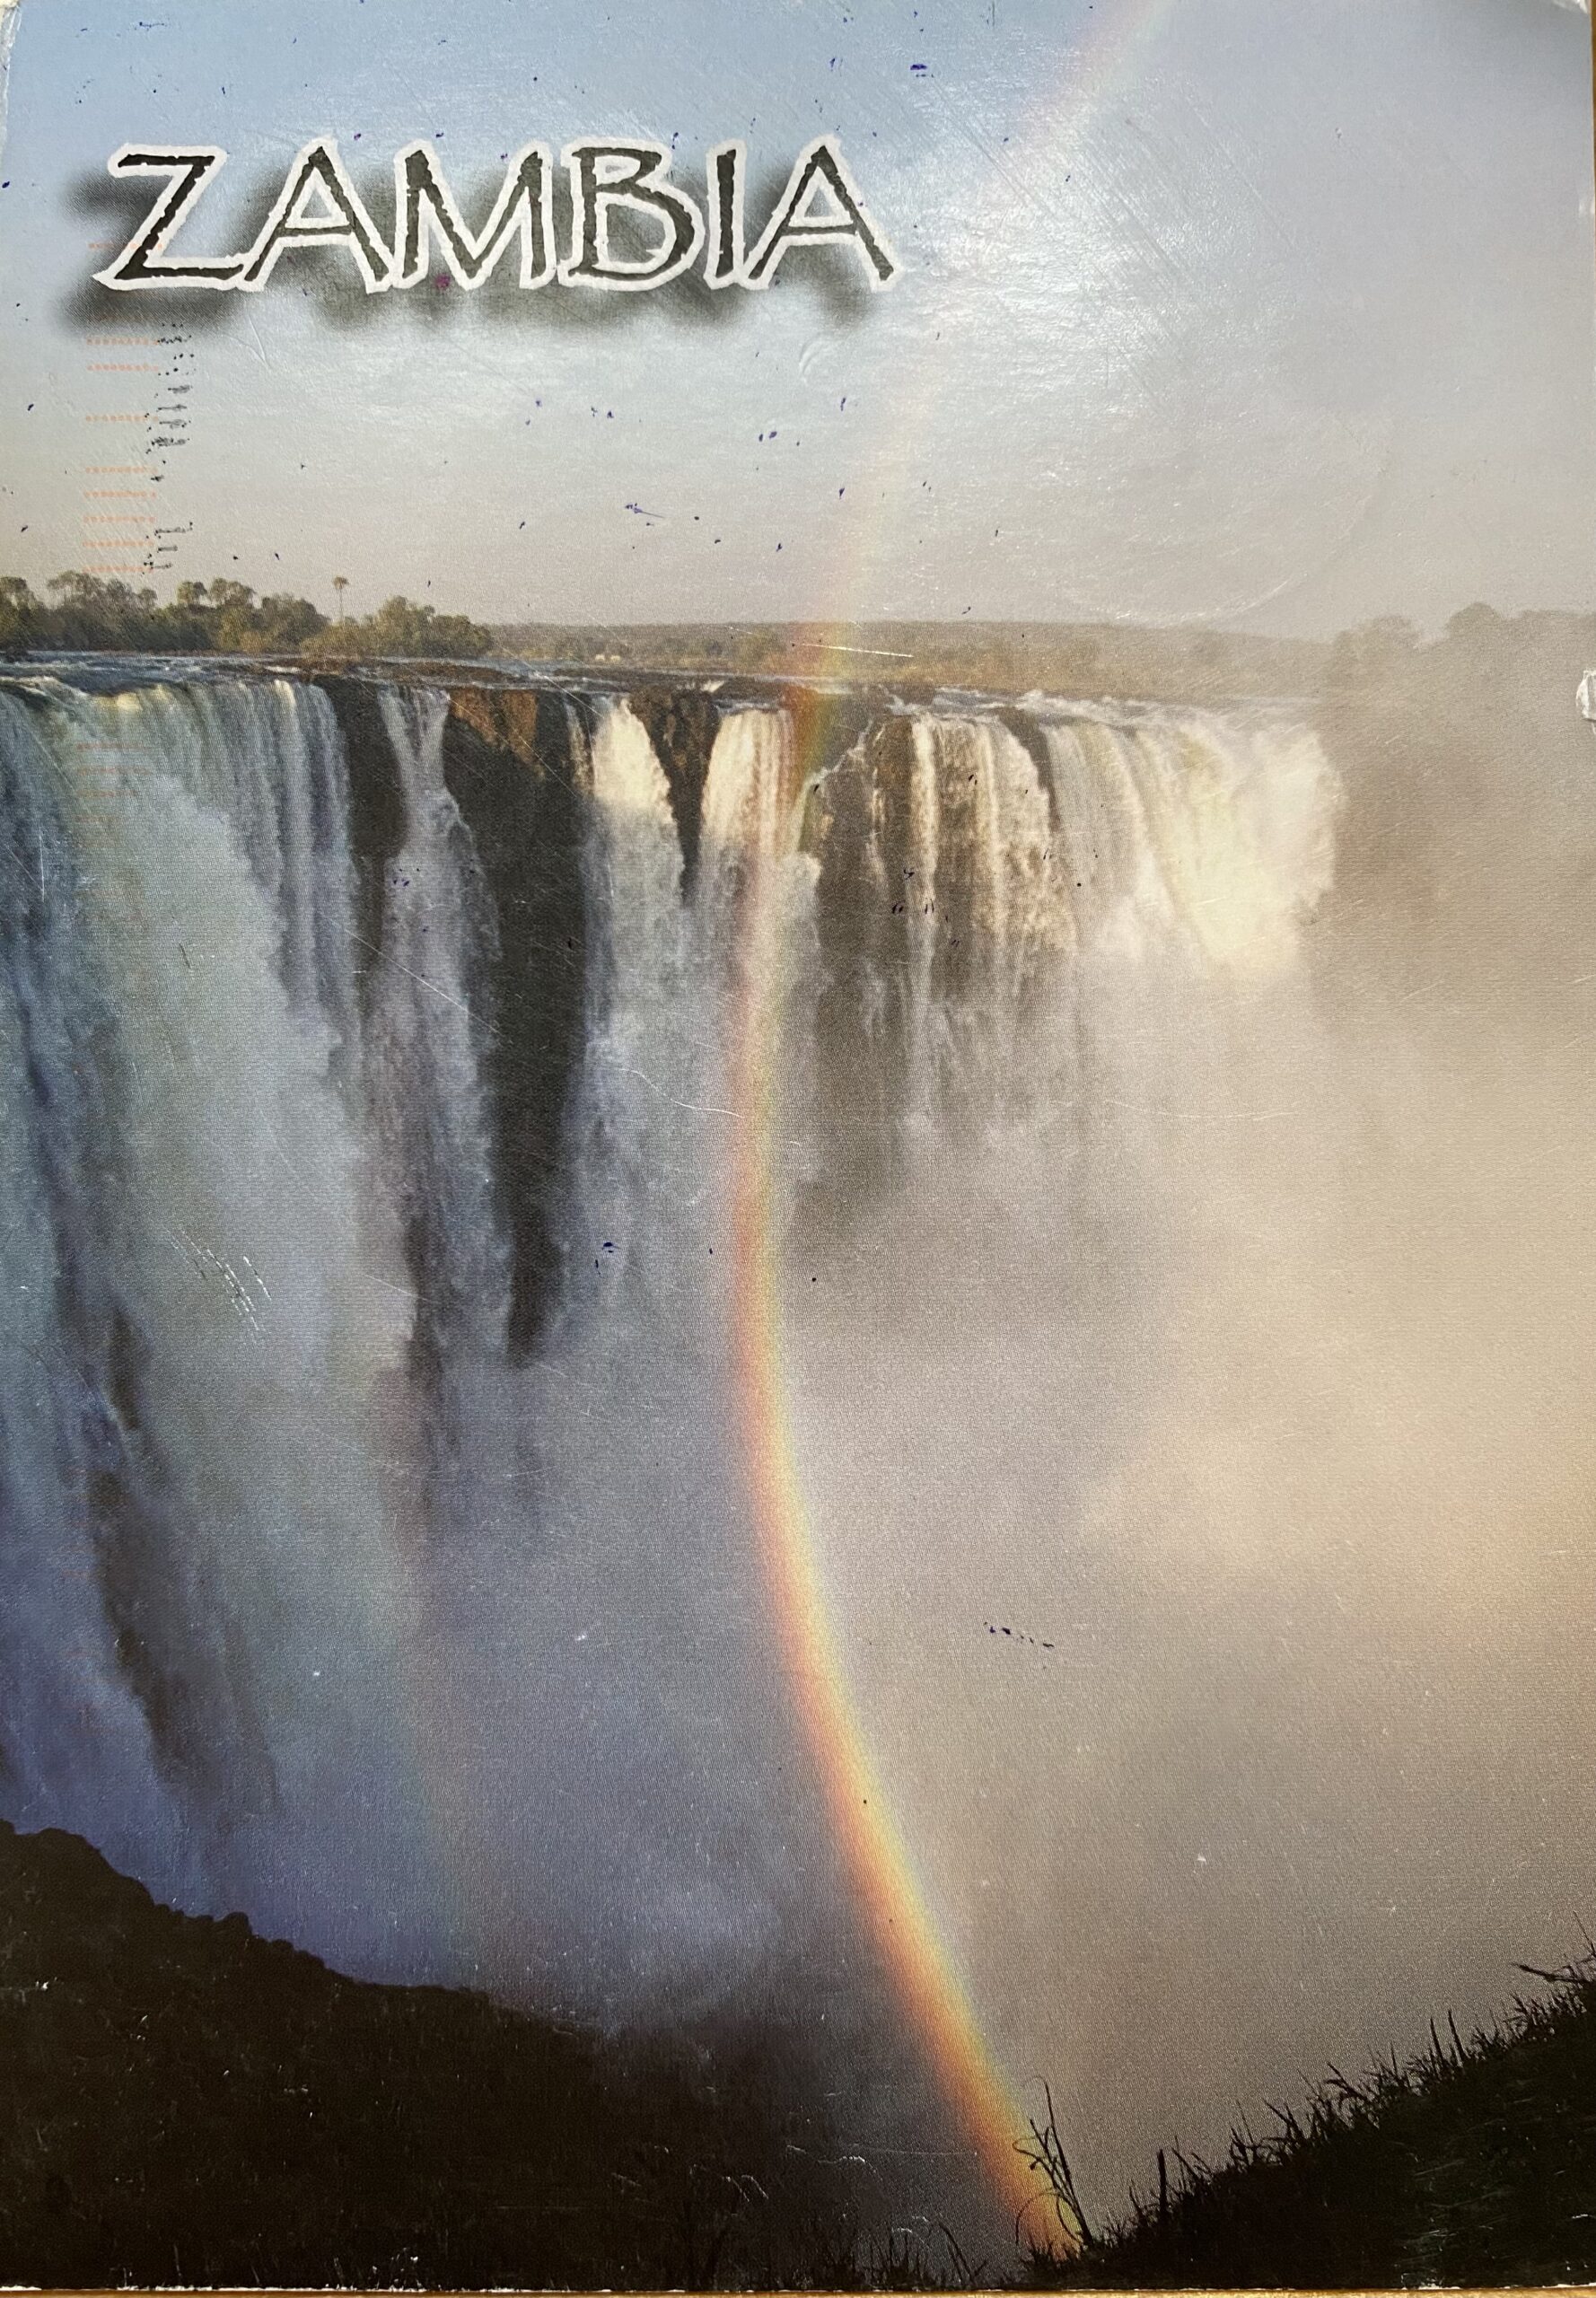 Postcard from Zambia, received June 6, 2022